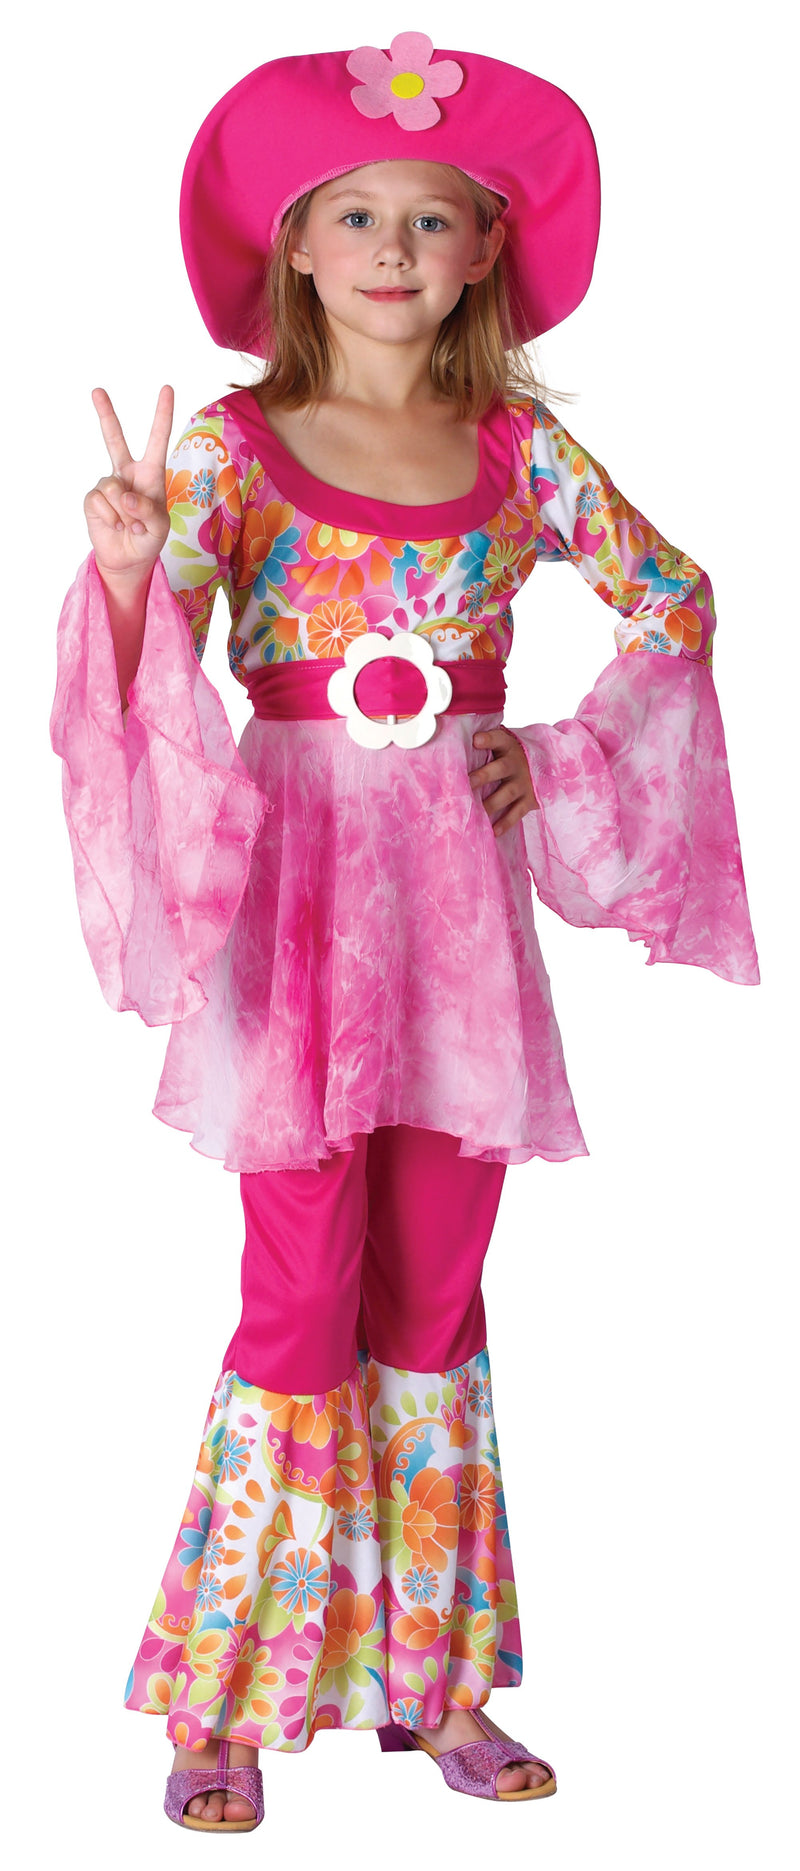 Hippy Diva Girl Xl Childrens Costumes Female To Fit Child Of Height 146cm 159cm Girls Bristol Novelty Childrens Costumes 2377